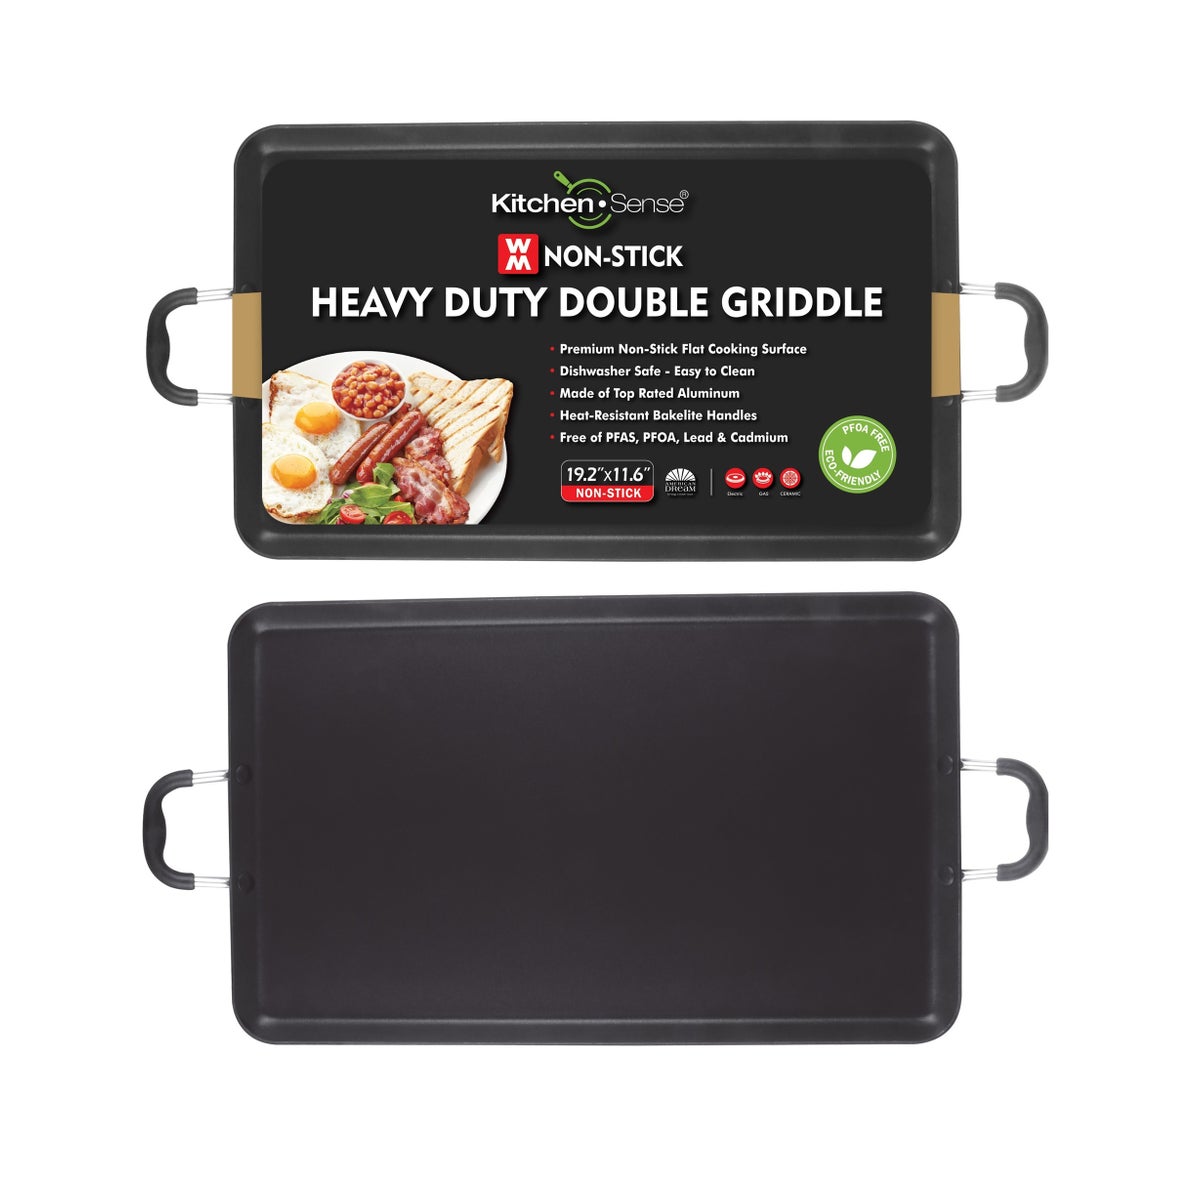 19.2"x11.6" Heavy Duty Double Griddle (6)